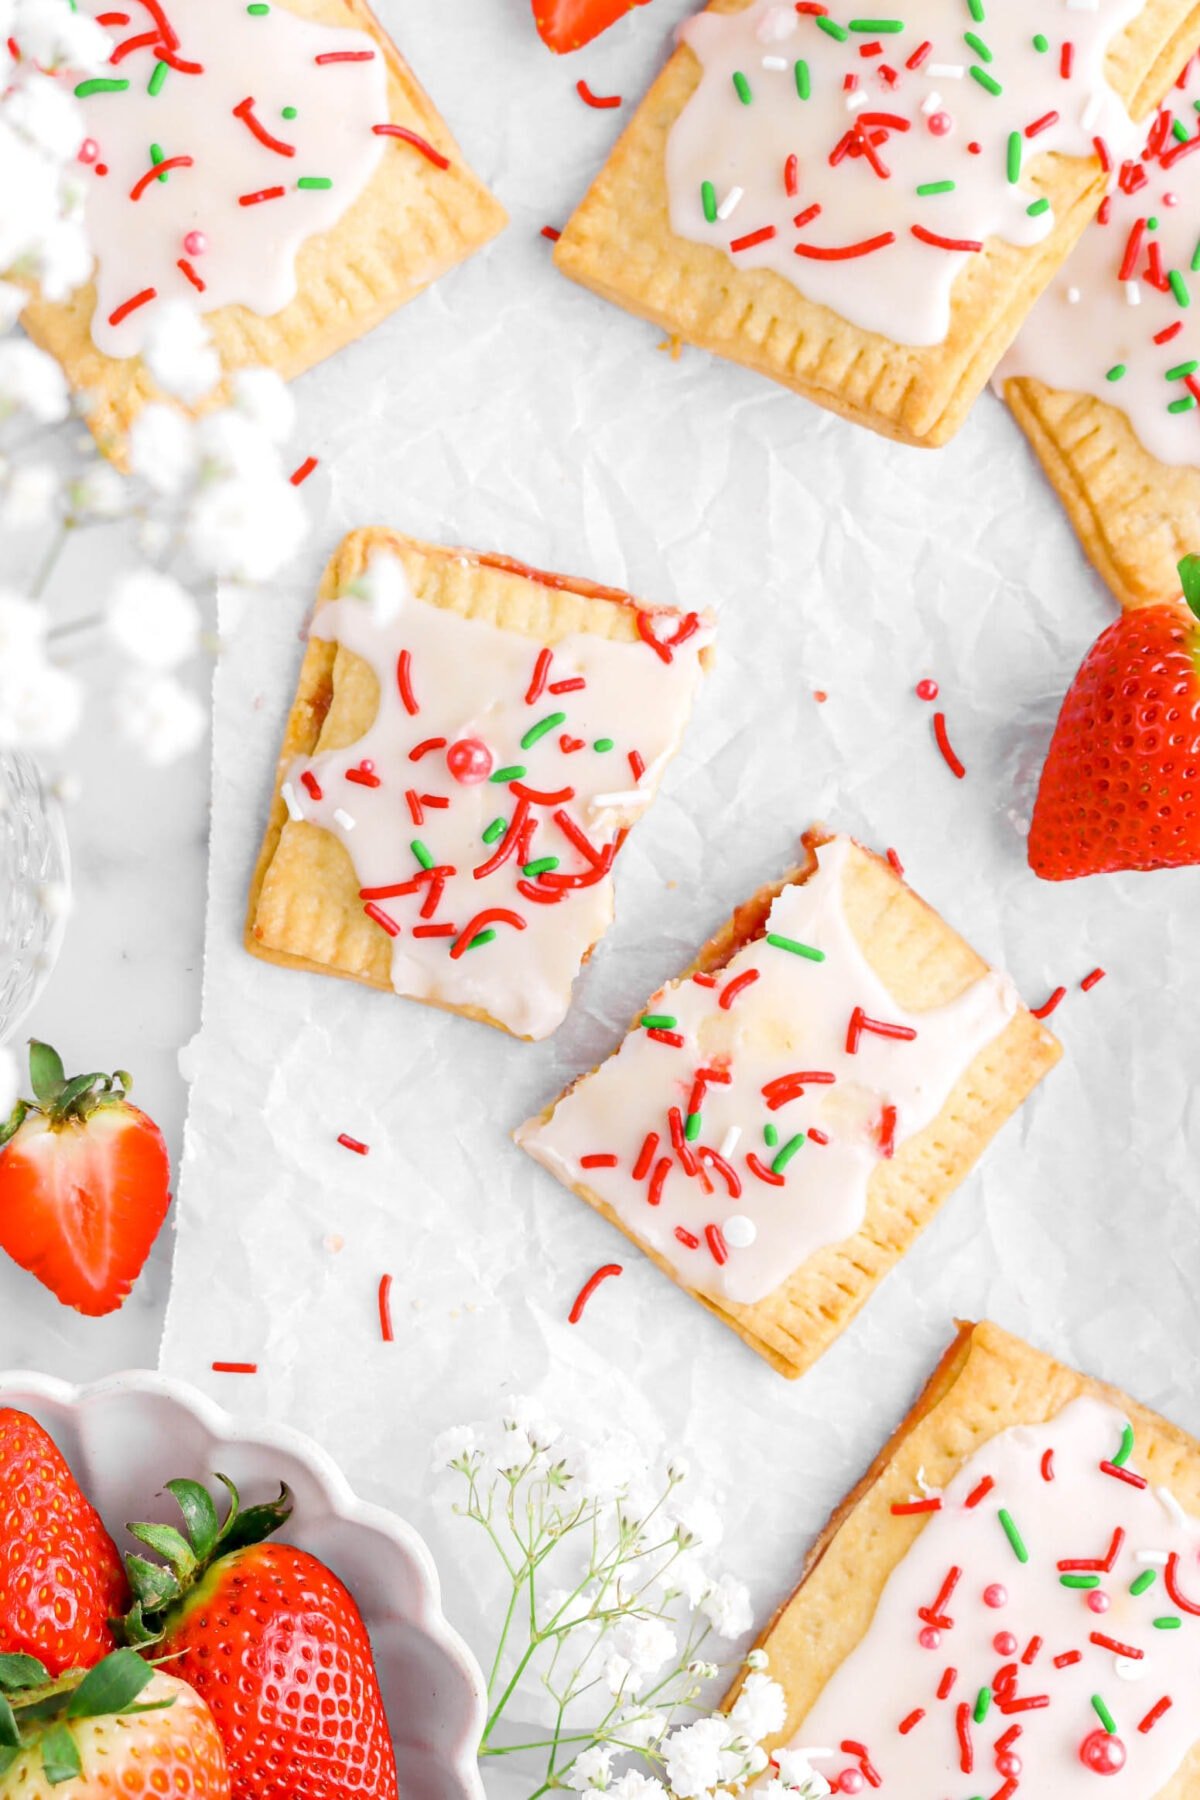 two halves of strawberry pop tart on parchment paper with more pop tarts and strawberries around.